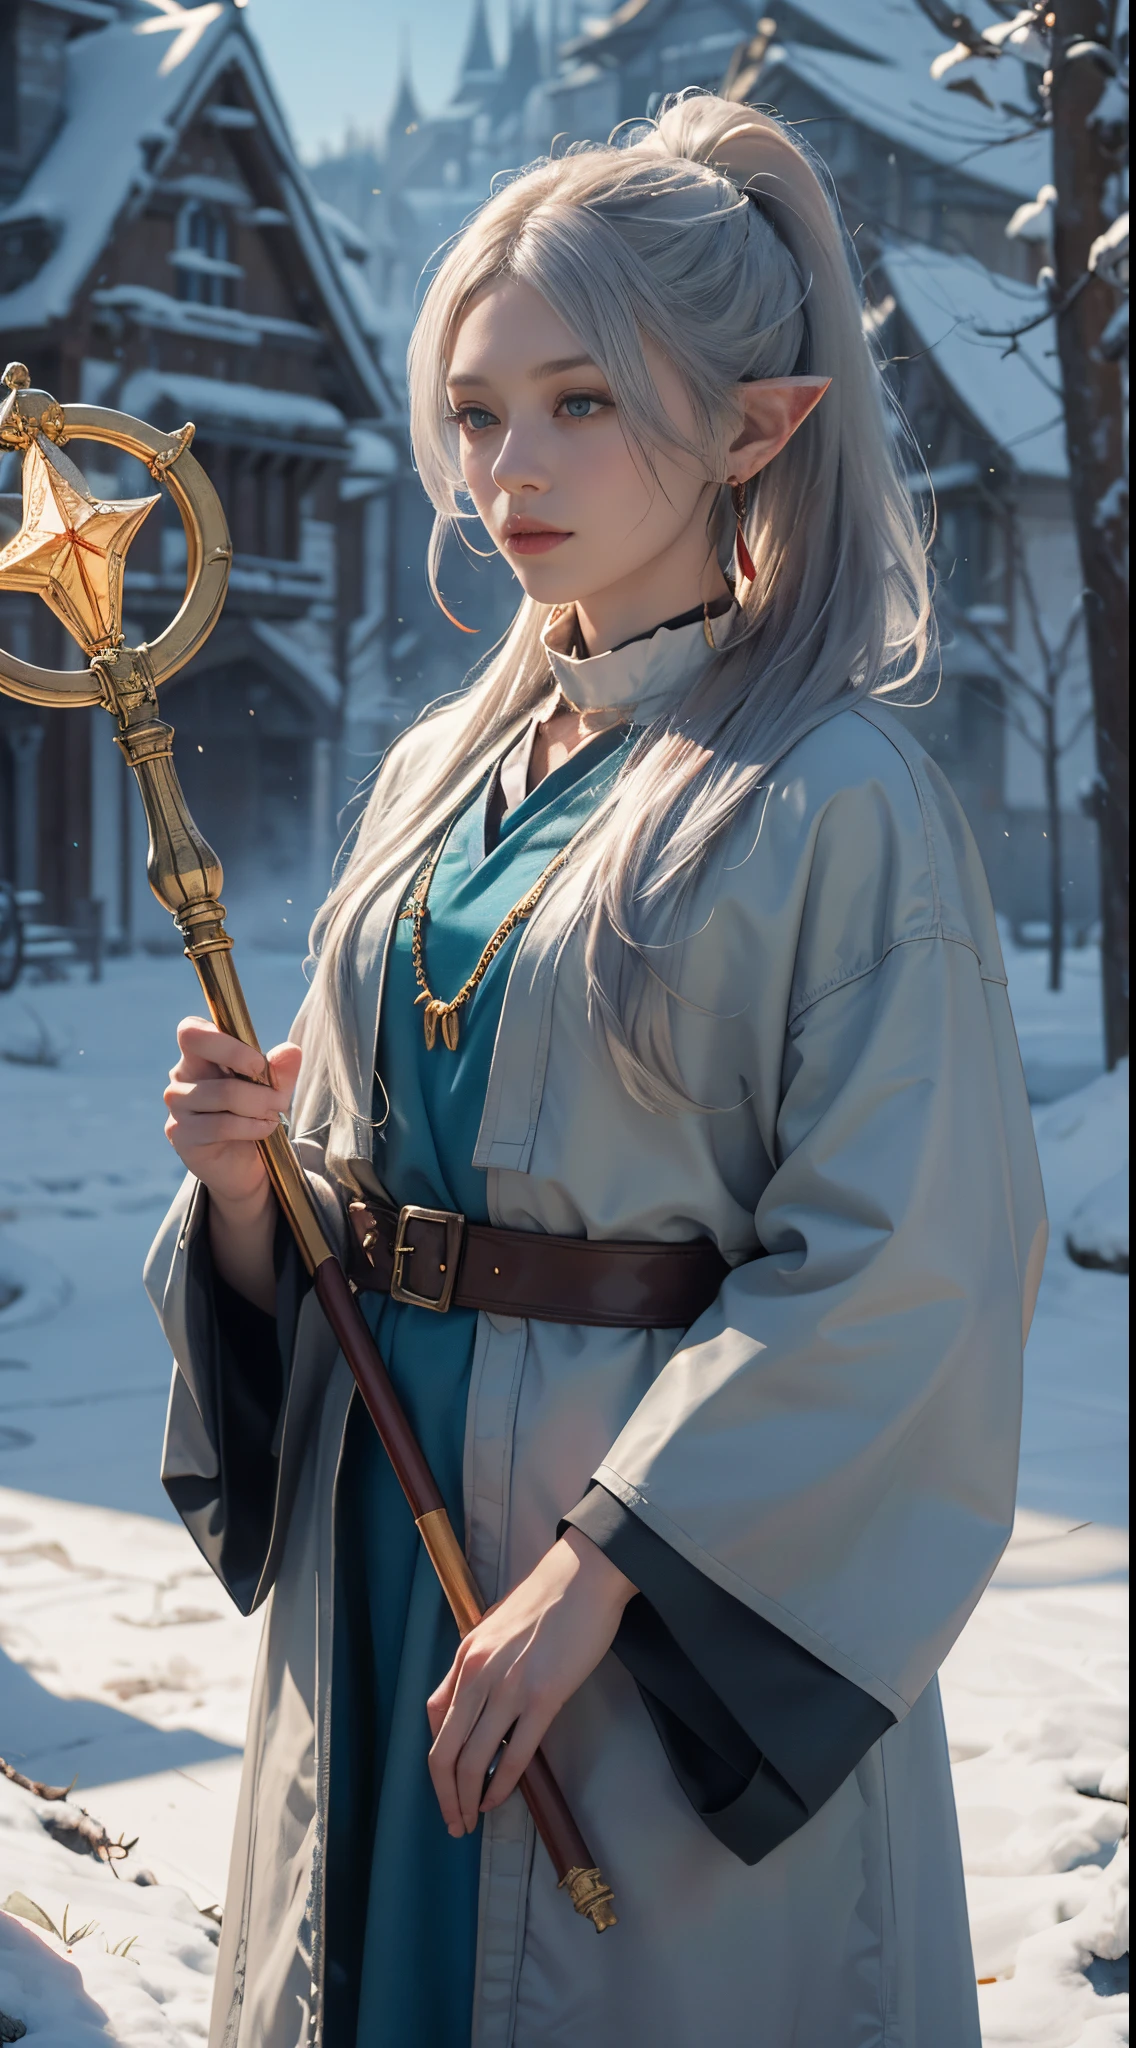 FrierenWinter, 8k, best quality, highres, realistic, real person, A wizard character with silver ponytail hair, earrings, and a shorter stature. The wizard is holding a luxurious, ornately decorated staff but is not wearing a hat. Their outfit is a blend of traditional wizard robes and contemporary magical attire, rich in detail and color. The character's expression is wise and confident, reflecting their mastery in magic. The background is a mystical setting, with elements of magic and fantasy.